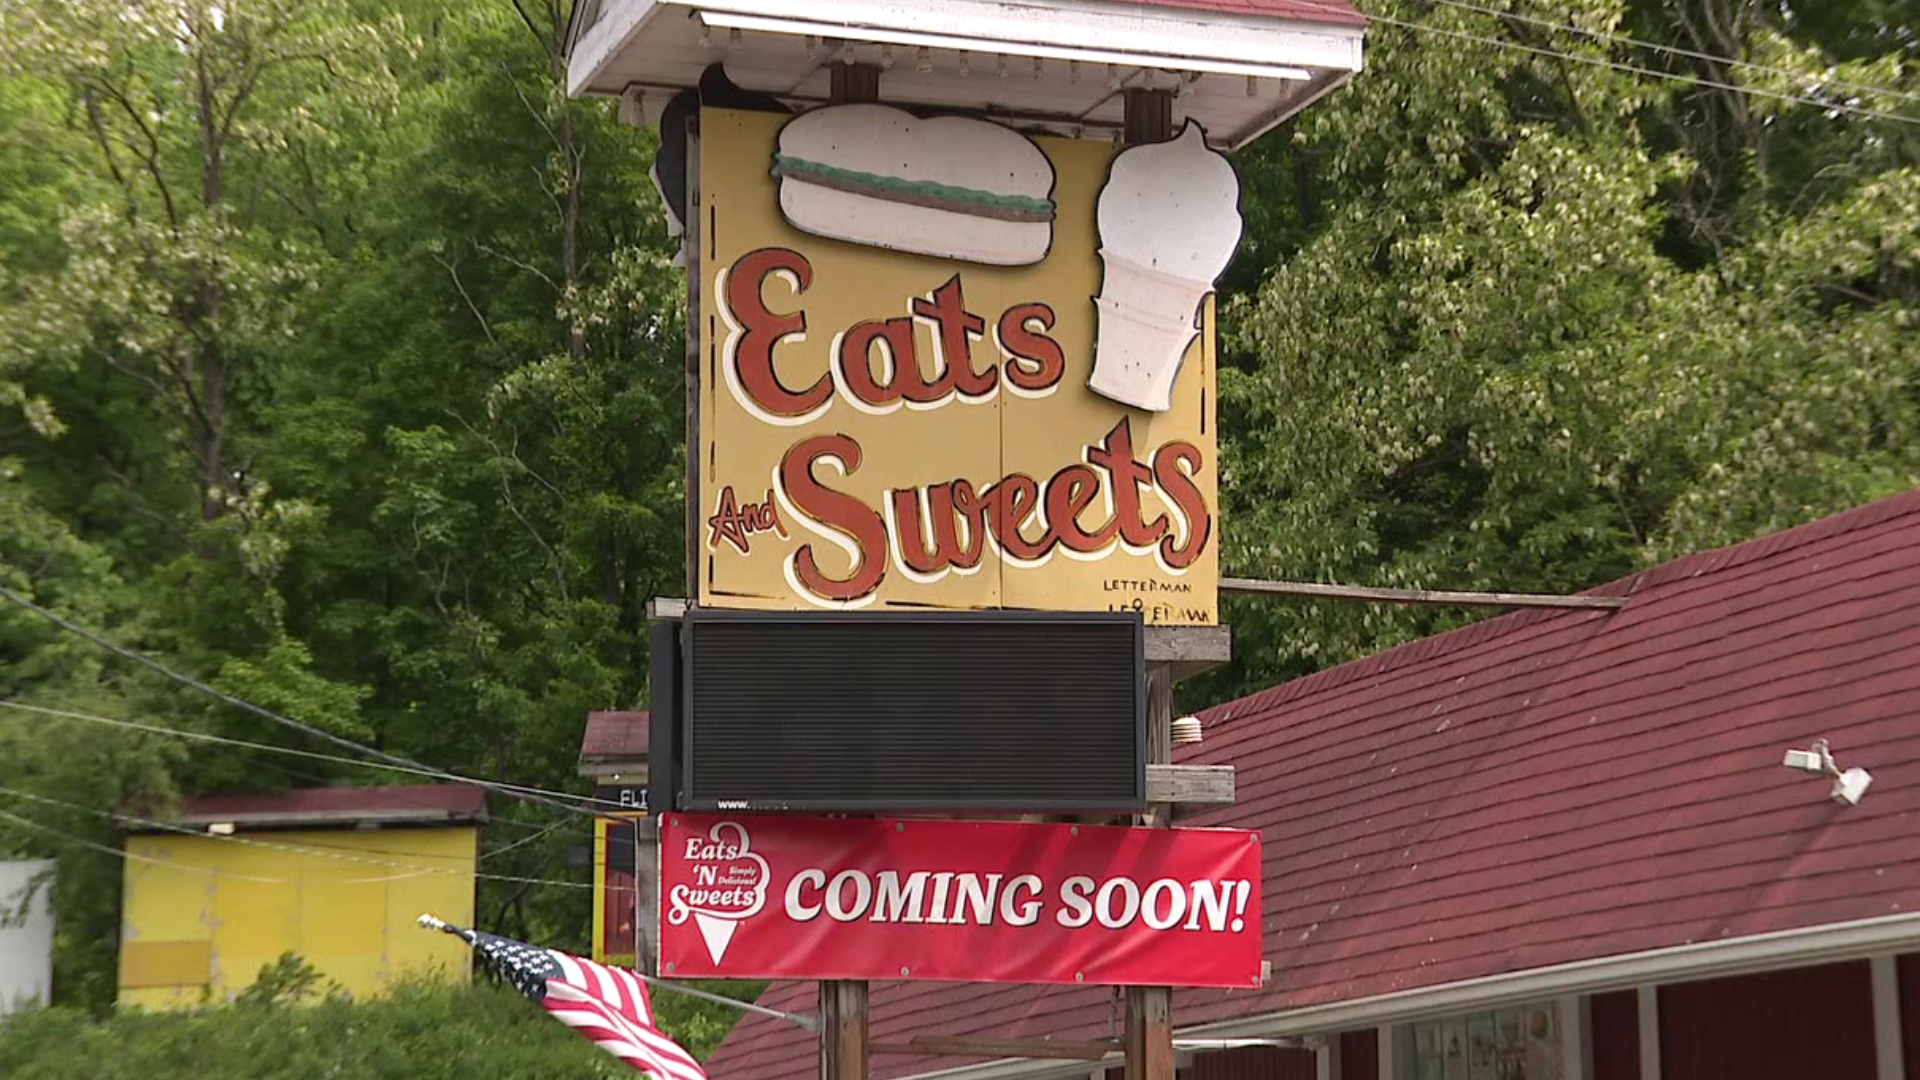 Eats and Sweets near Tannersville closed a few years ago after the owner passed away. There's a sweet story behind the people who bought the business.